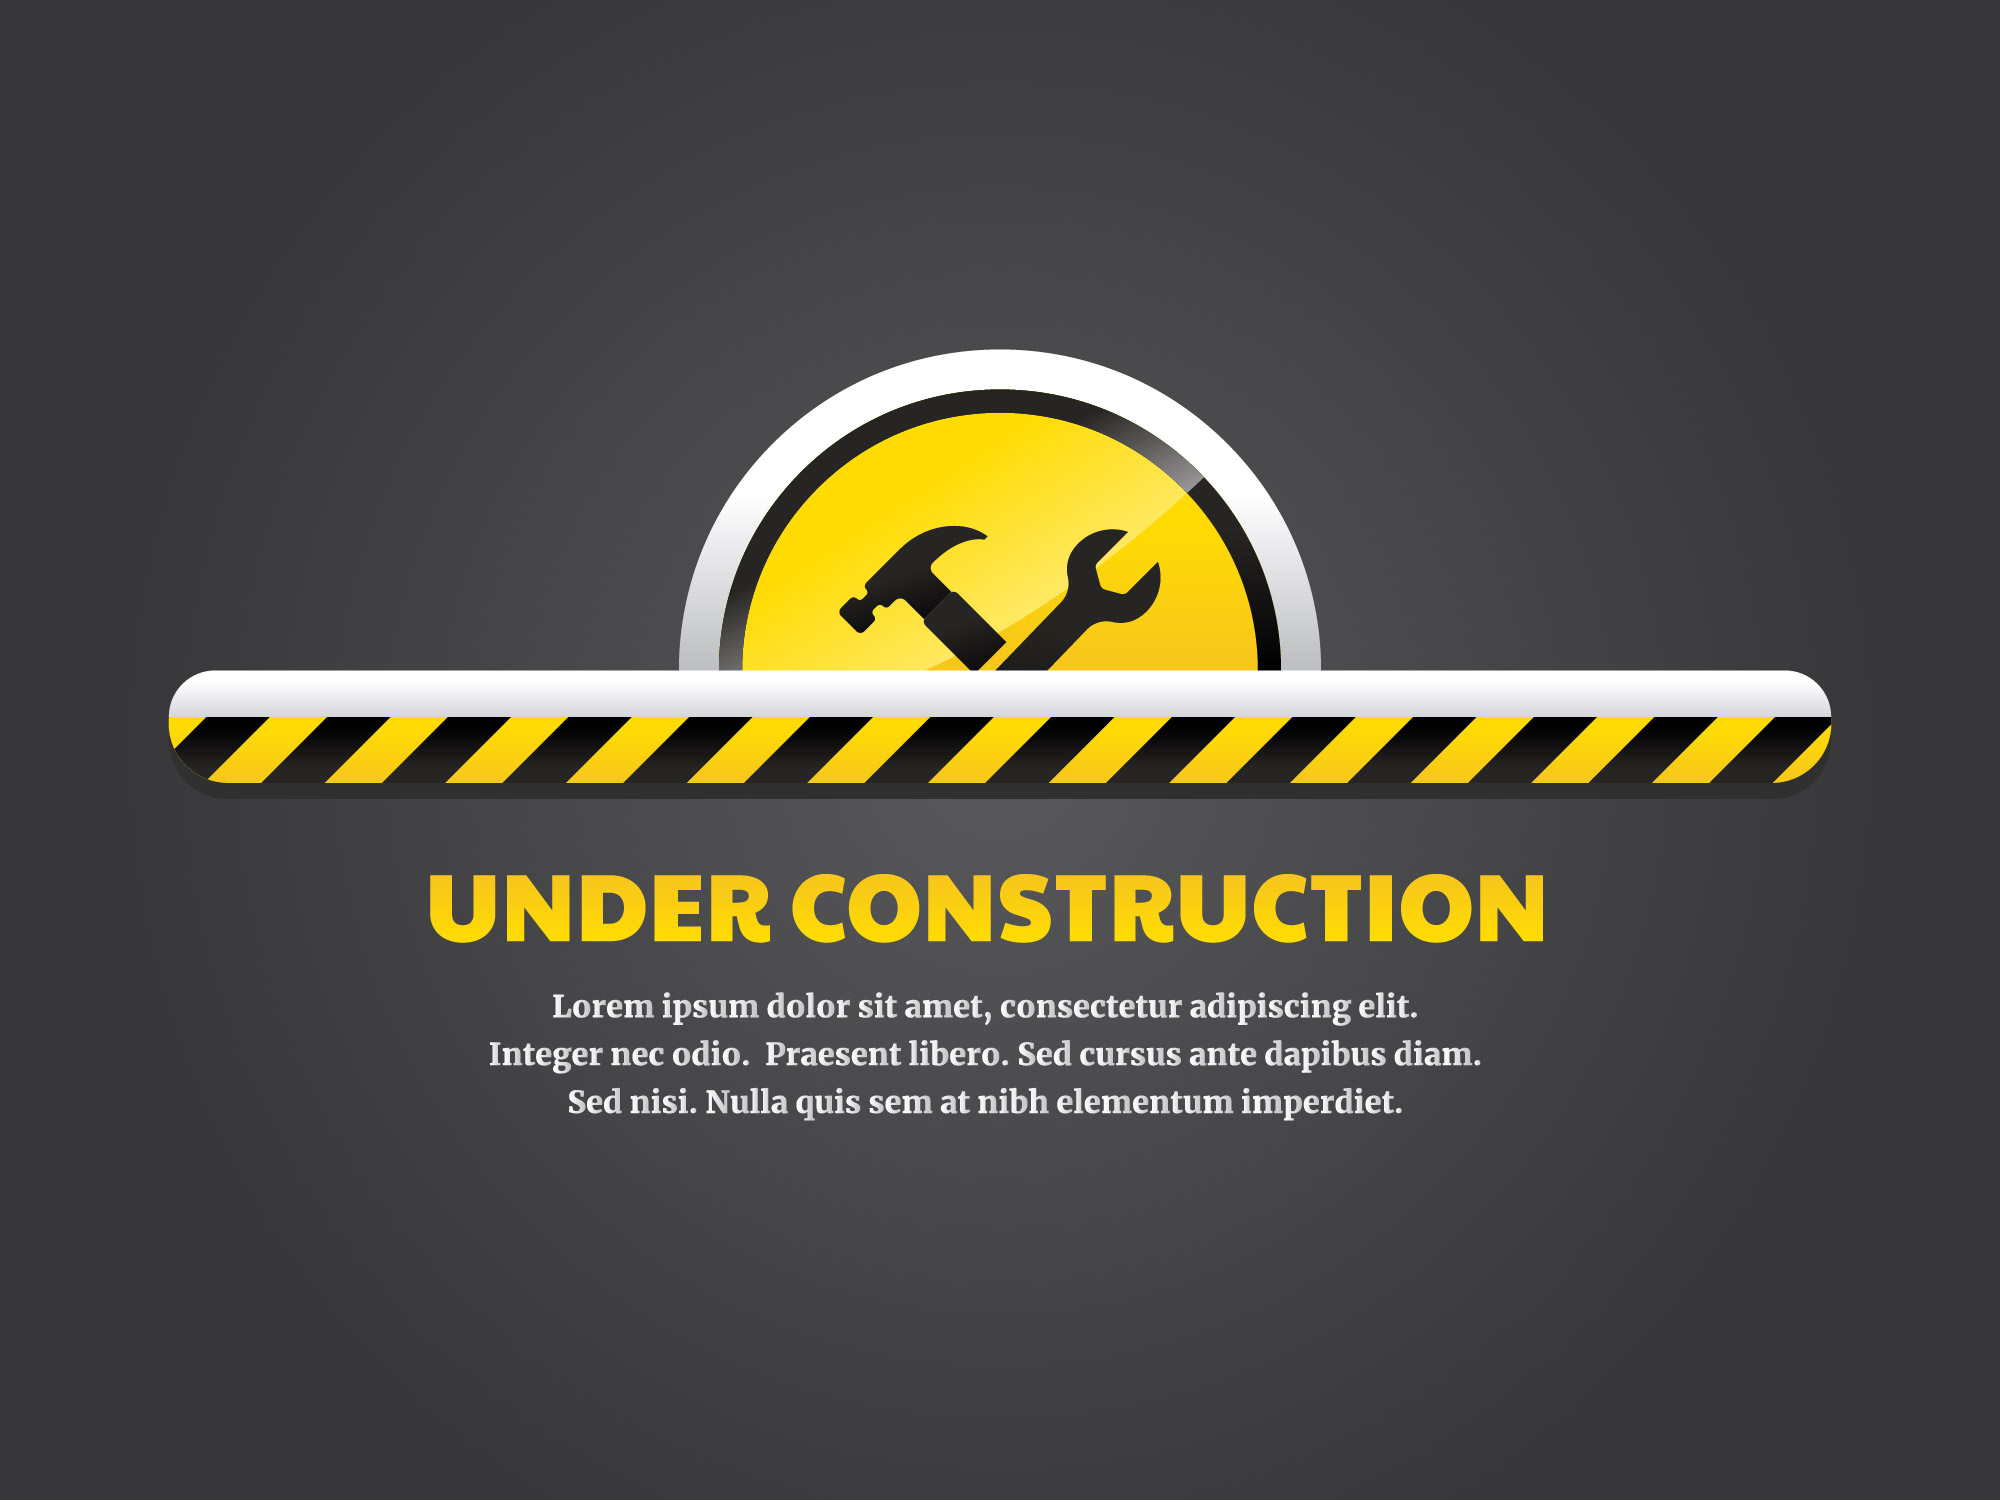 Download Under construction landing page for free.